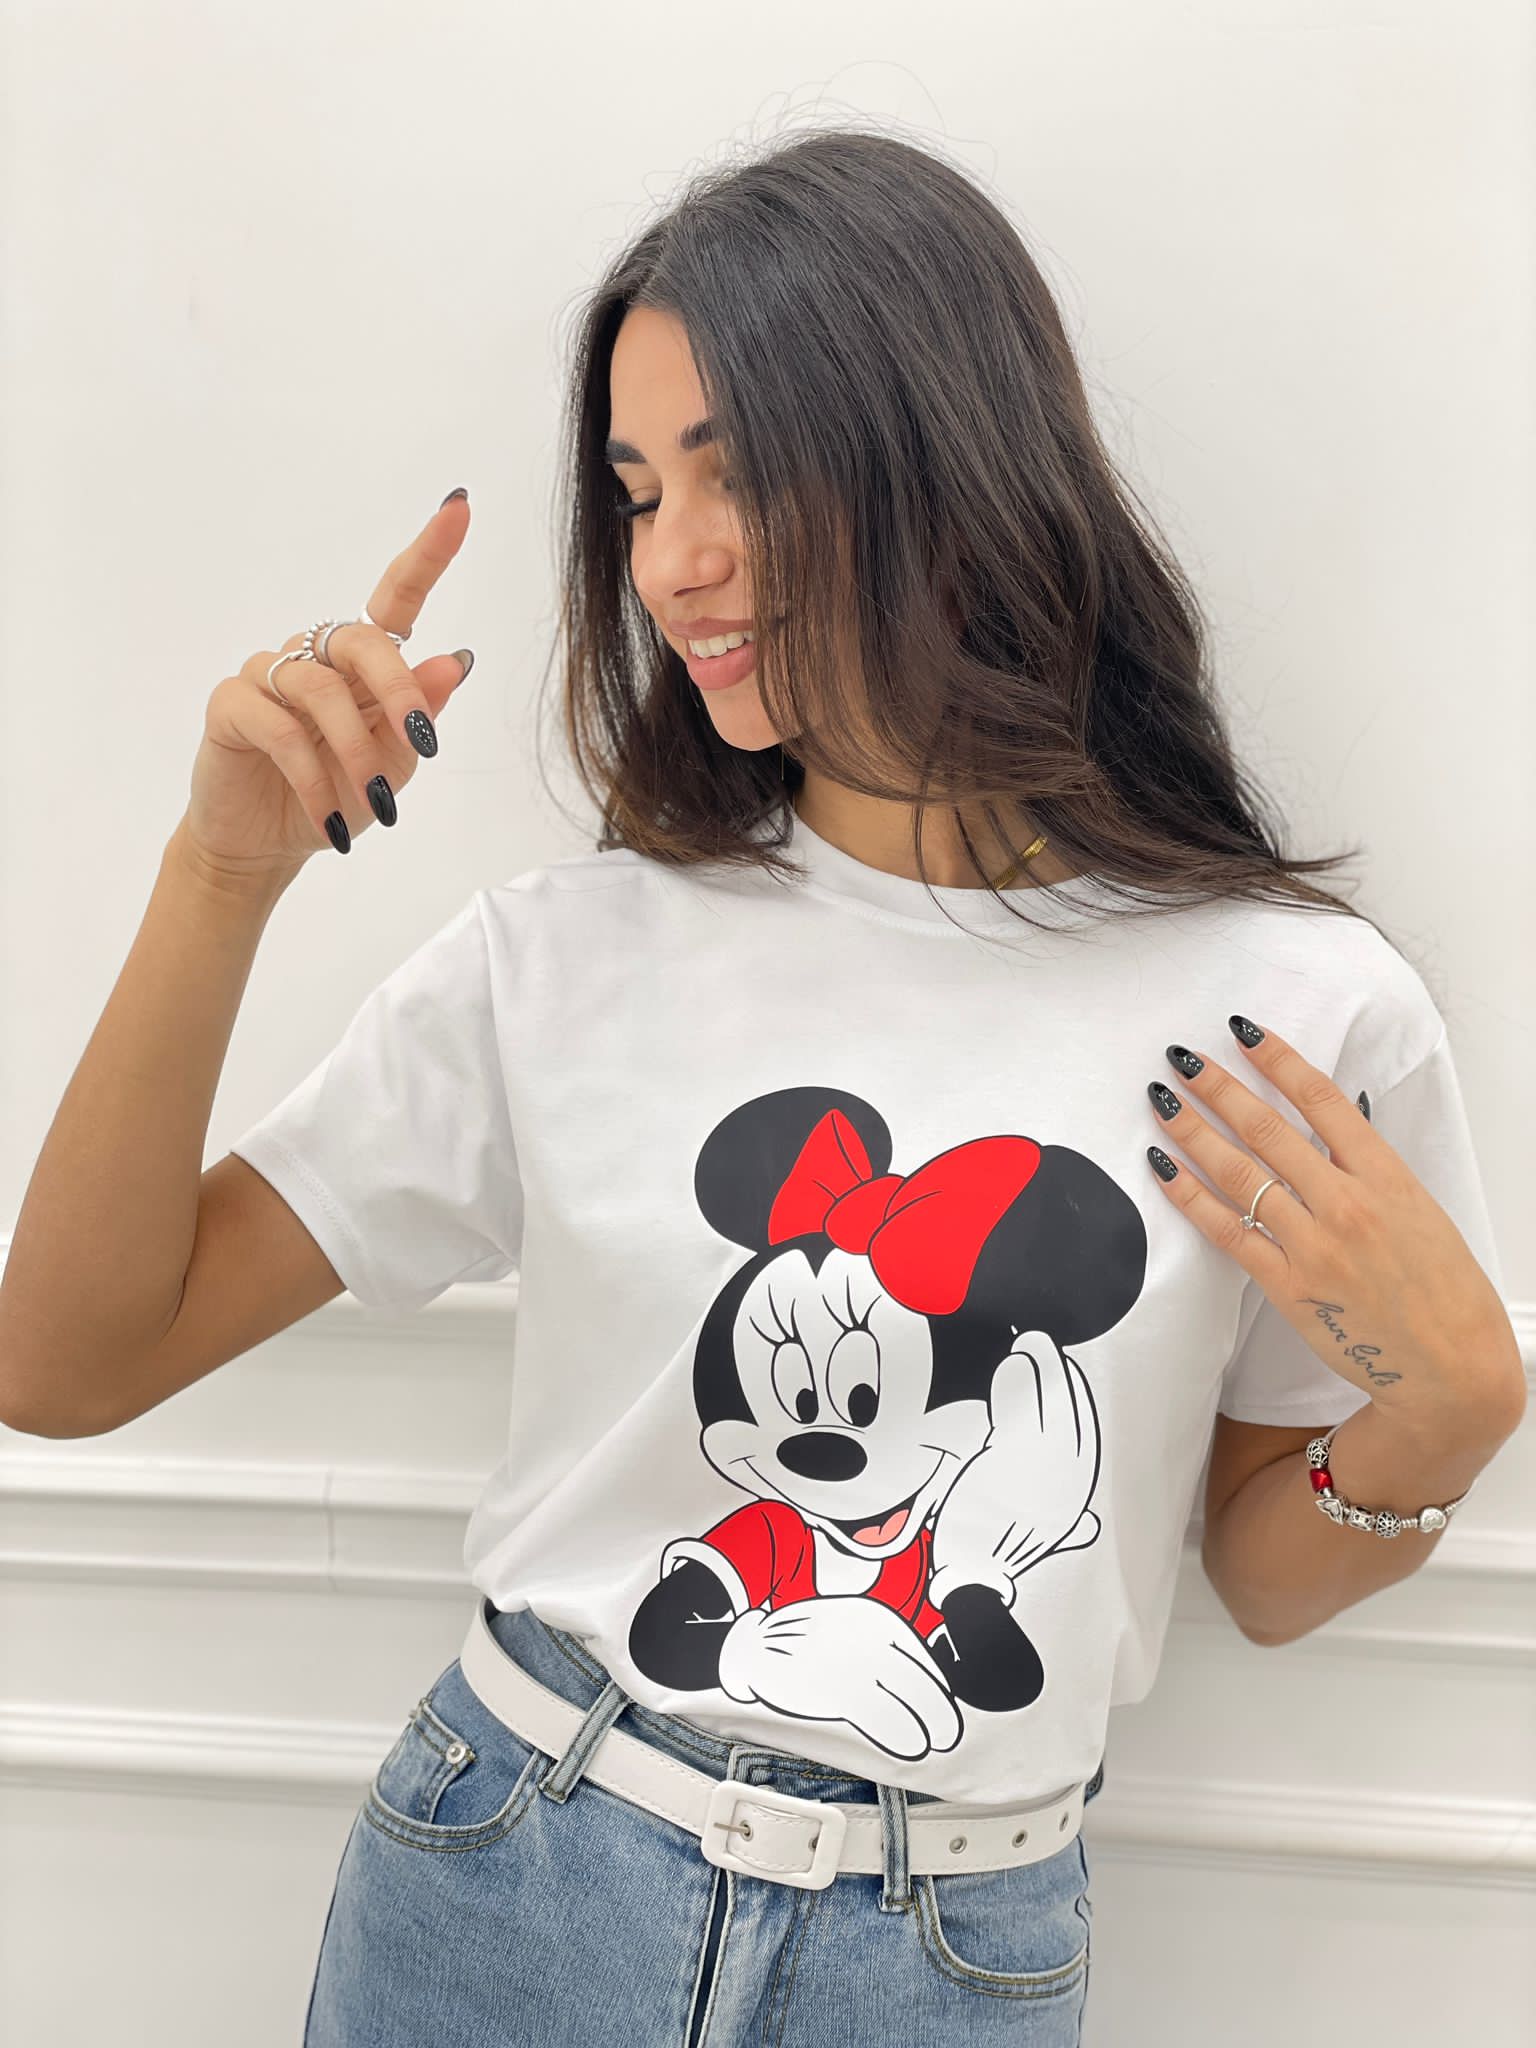 66104-T-SHIRT-STAMPA-MINNIE-NEW-COLLECTION-T-SHIRT-STAMPA-MINNIE-NEW-COLLECTION.jpg